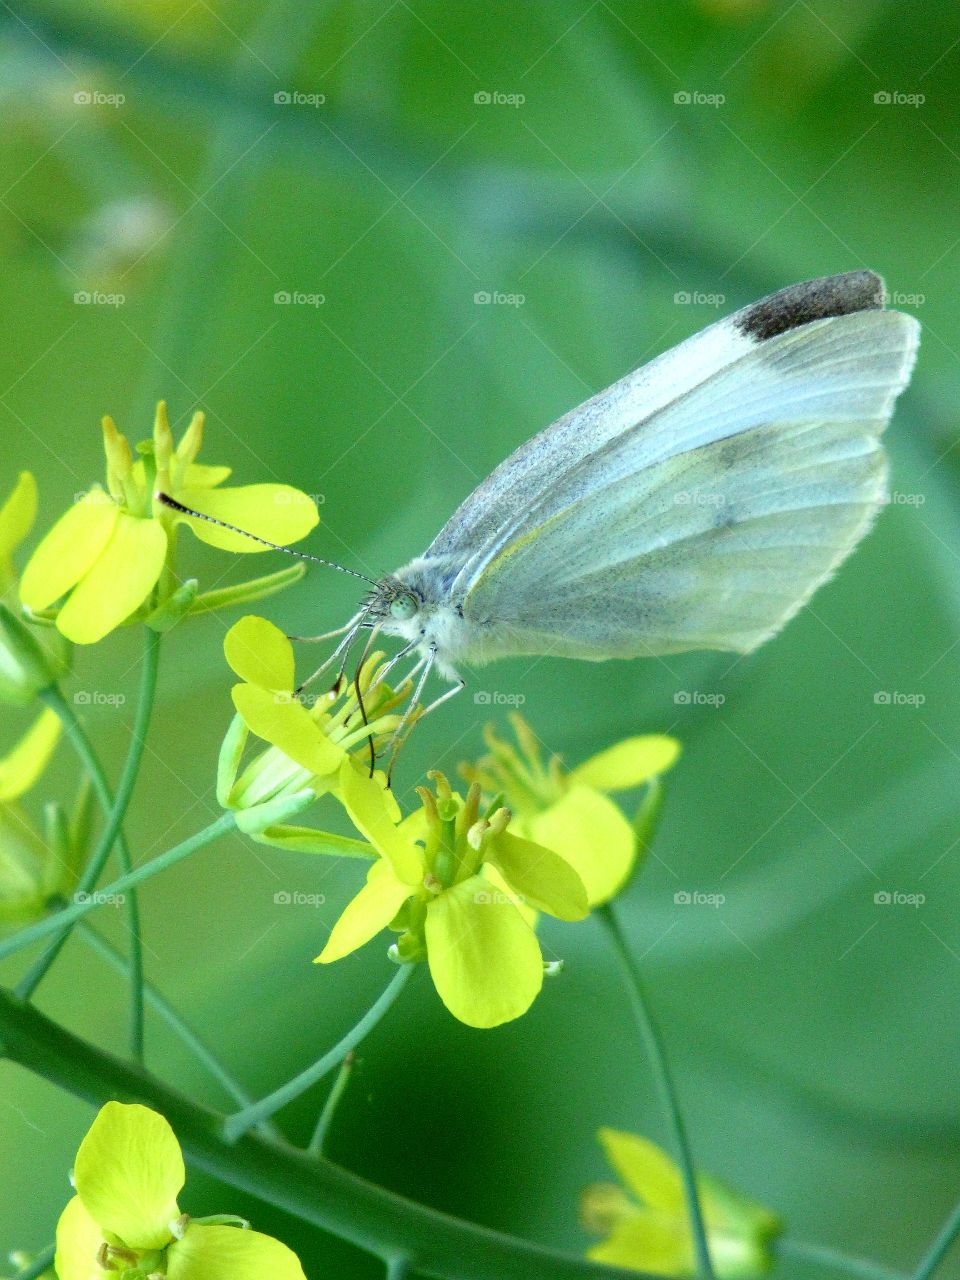 Cabbage butterfly pollinating Kale flowers